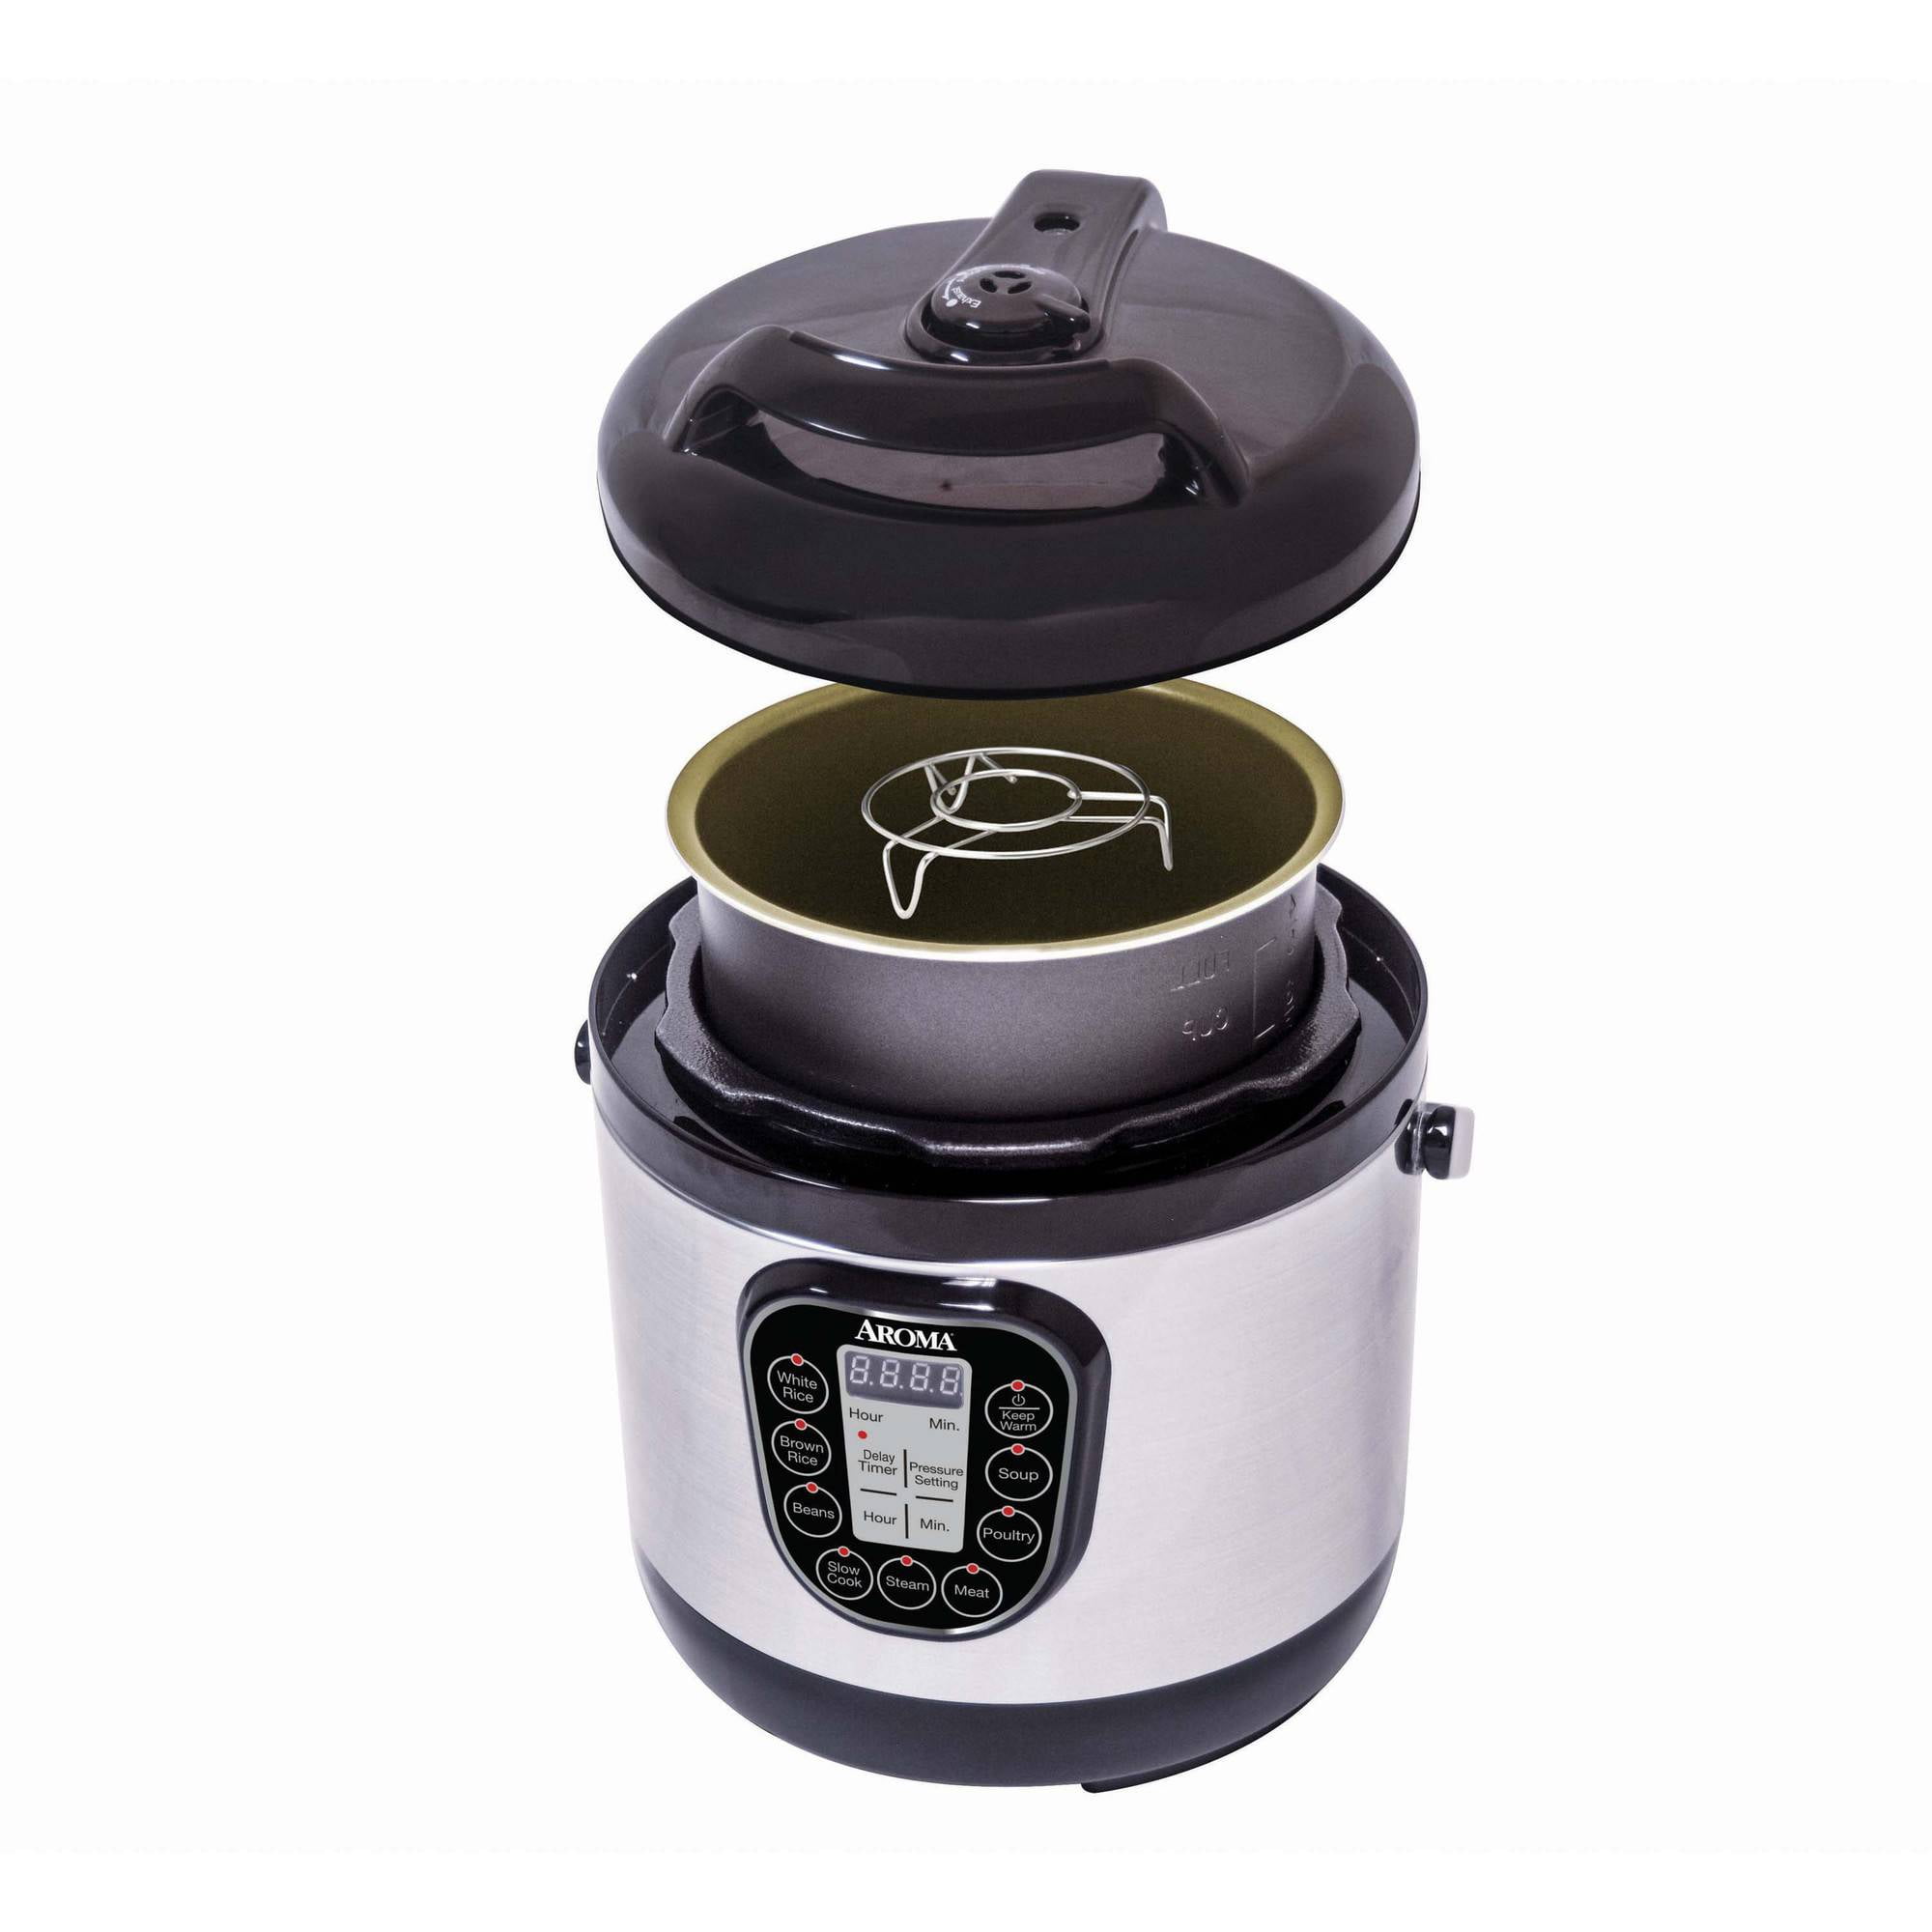 Aroma Pressure Cookers